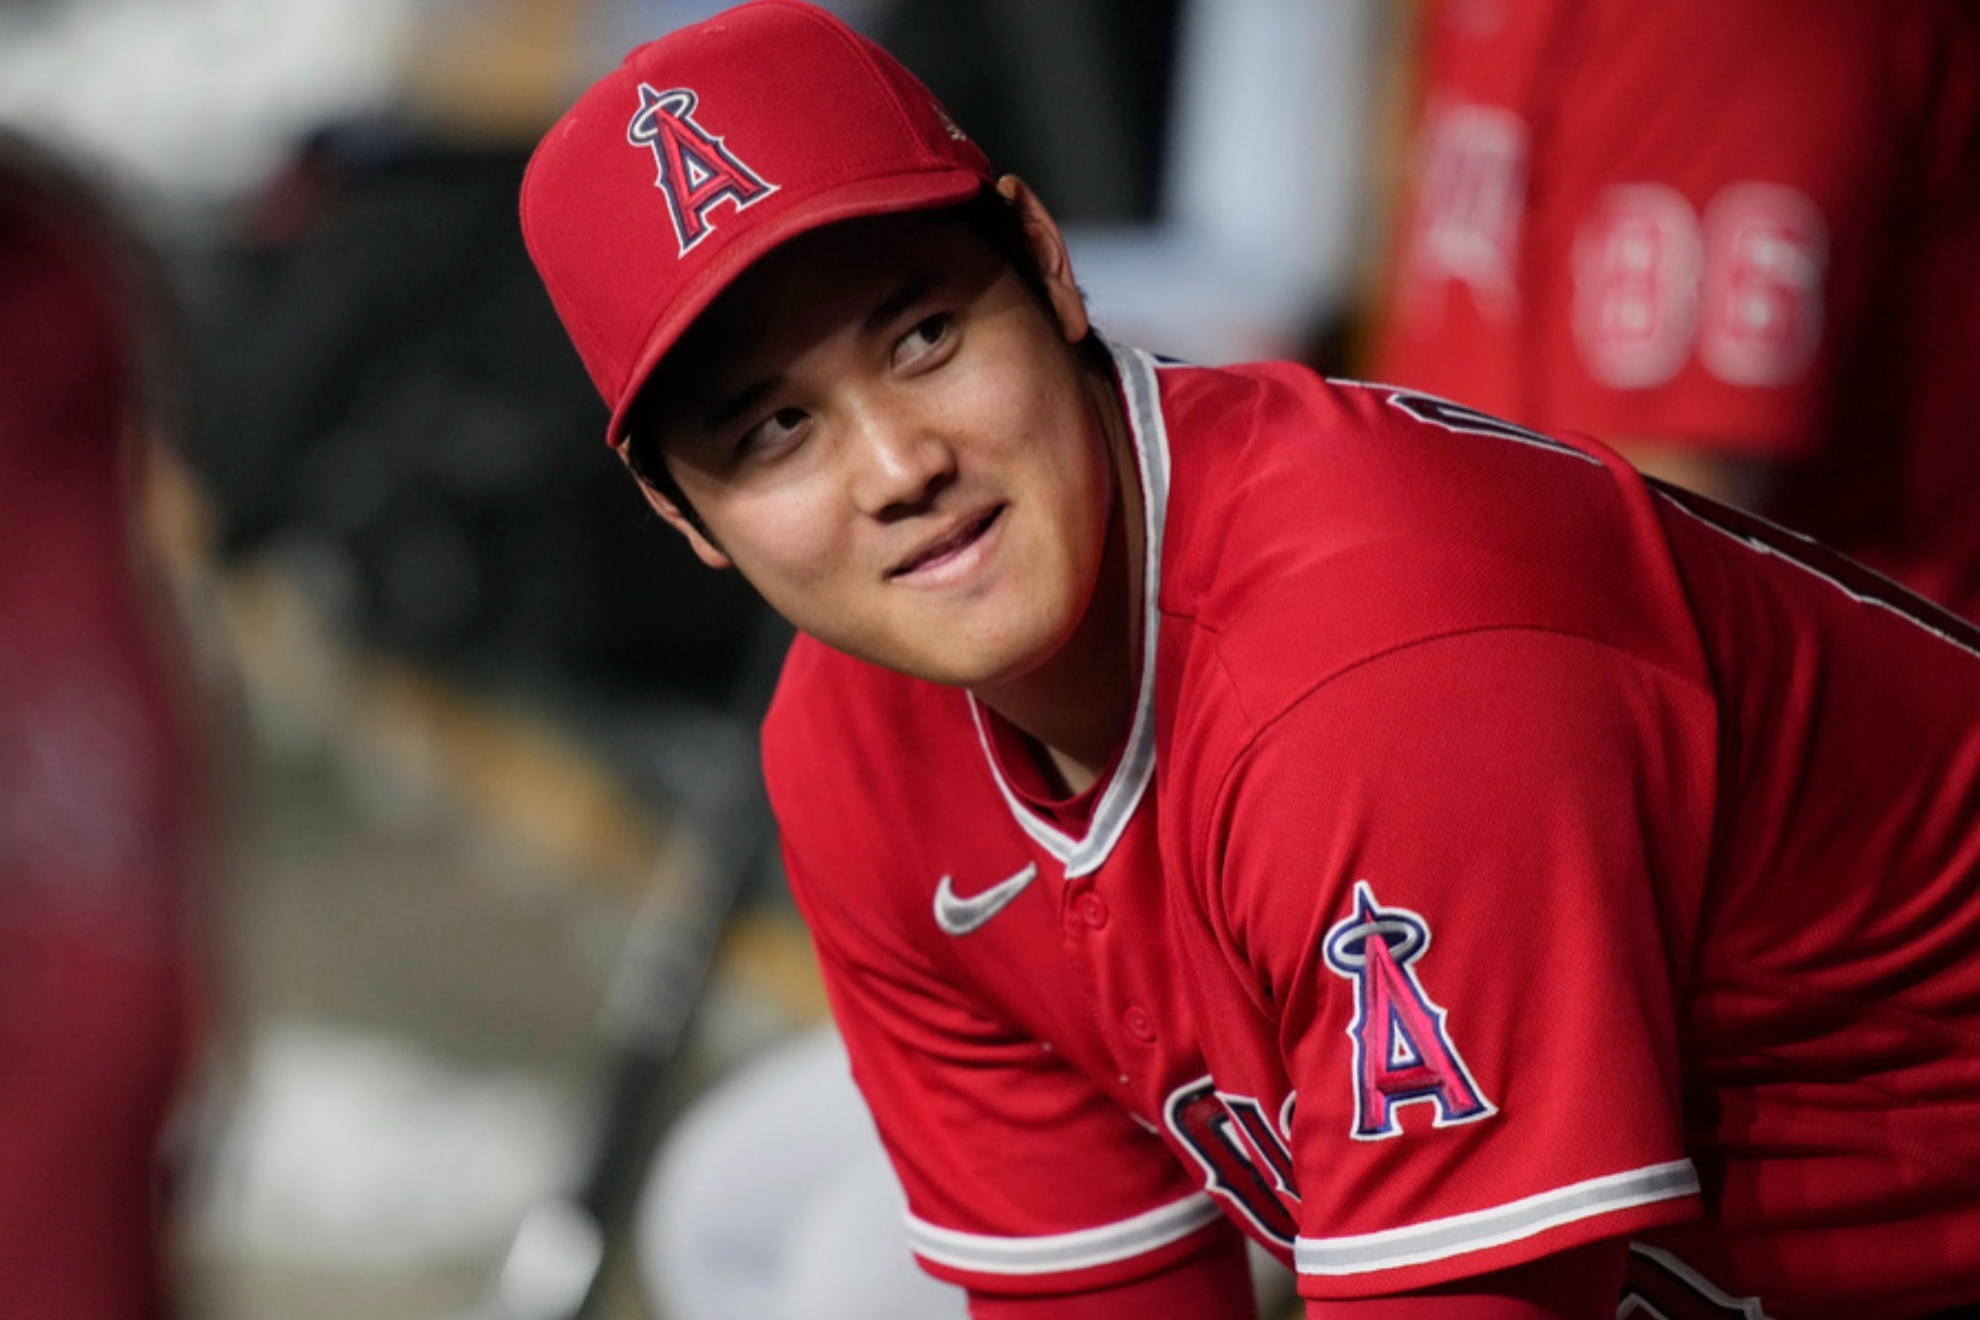 Shohei Ohtani will remain with the Los Angeles Angels